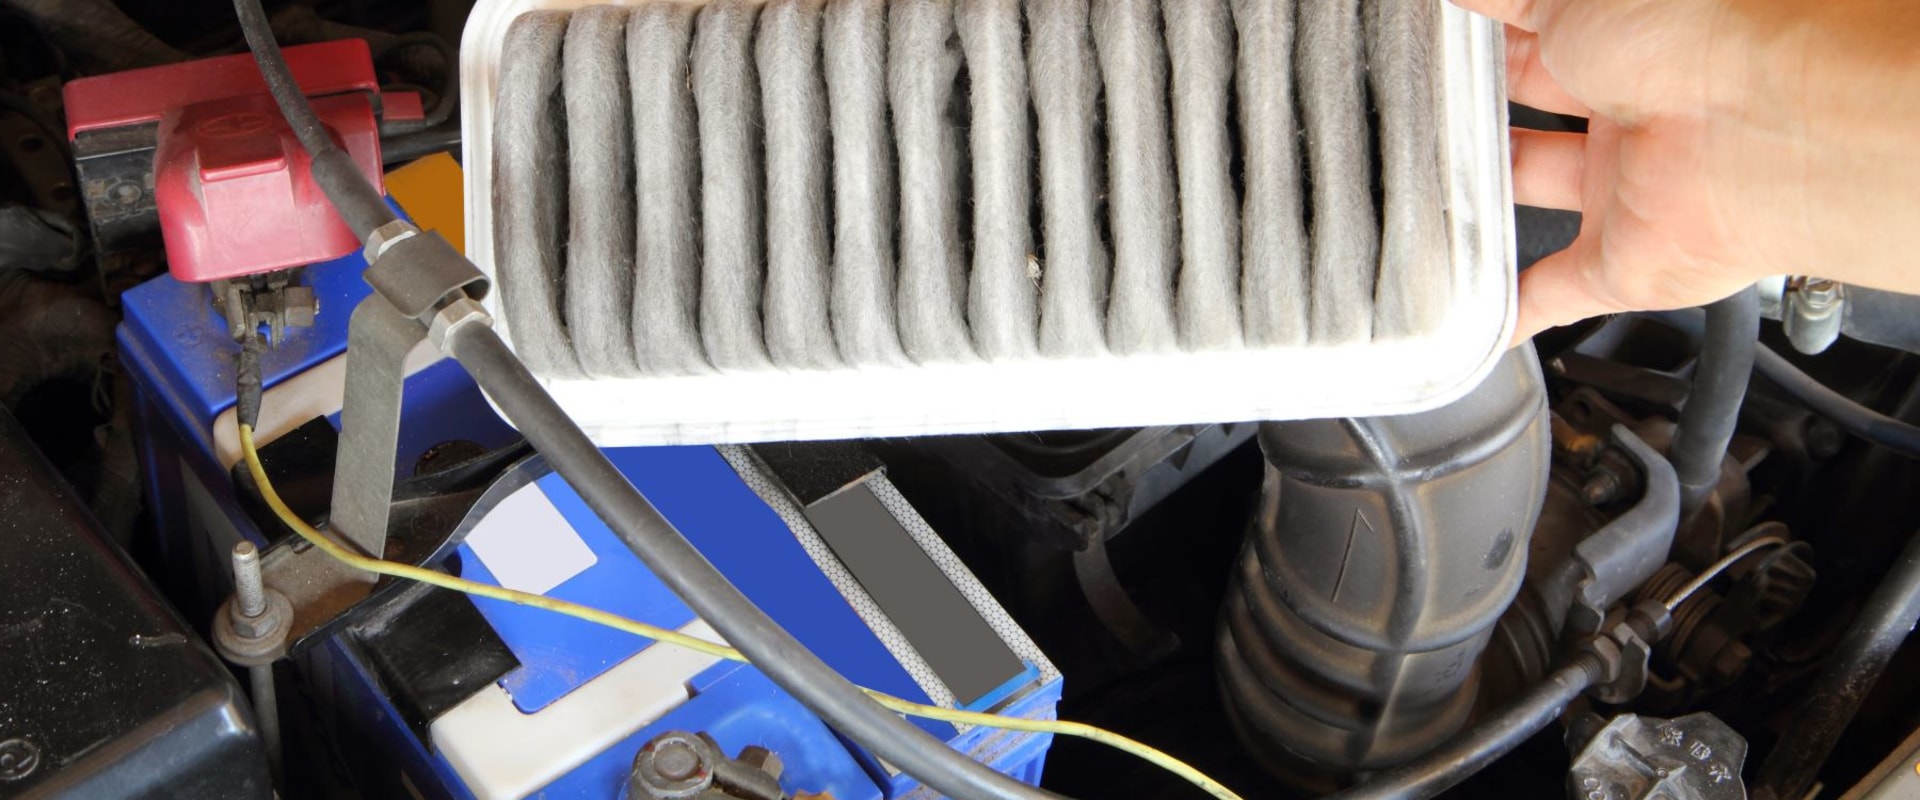 Will a Dirty Air Filter Stop Your AC From Working?